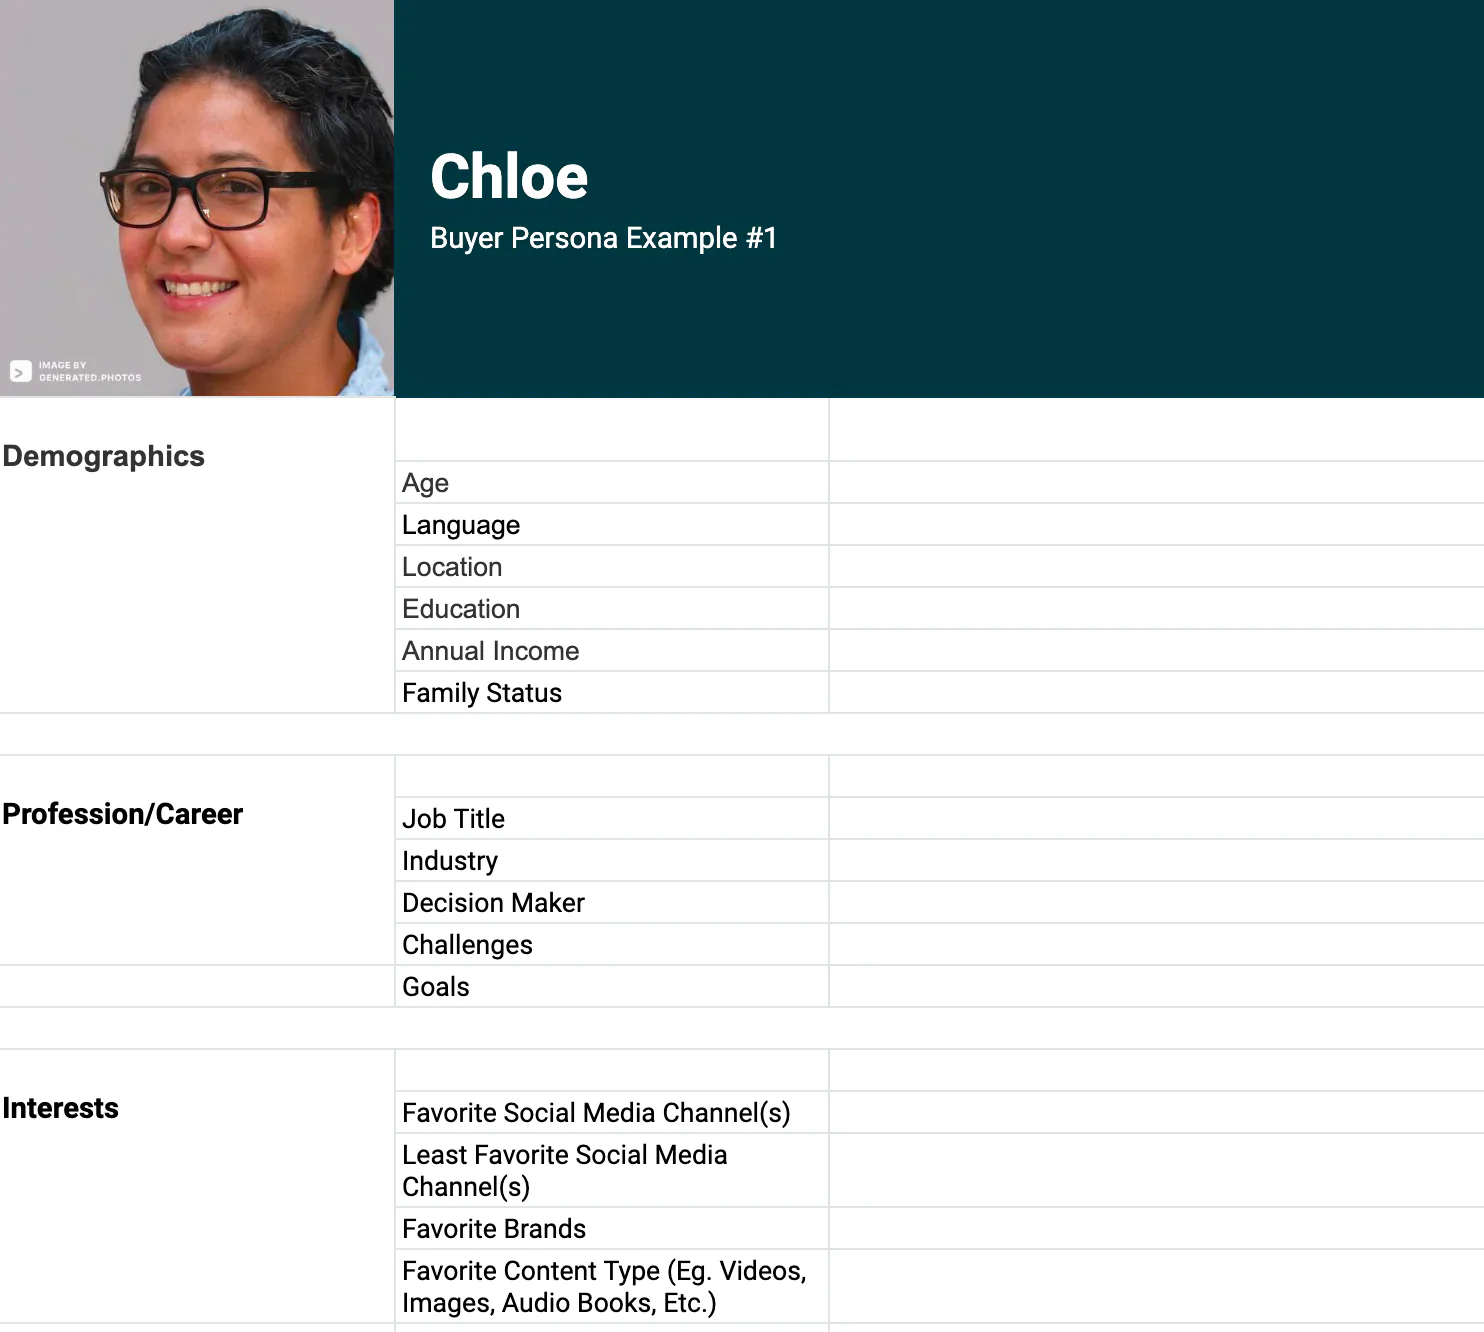 Buyer (user) persona template with fields for demographics, profession/career, and interests.